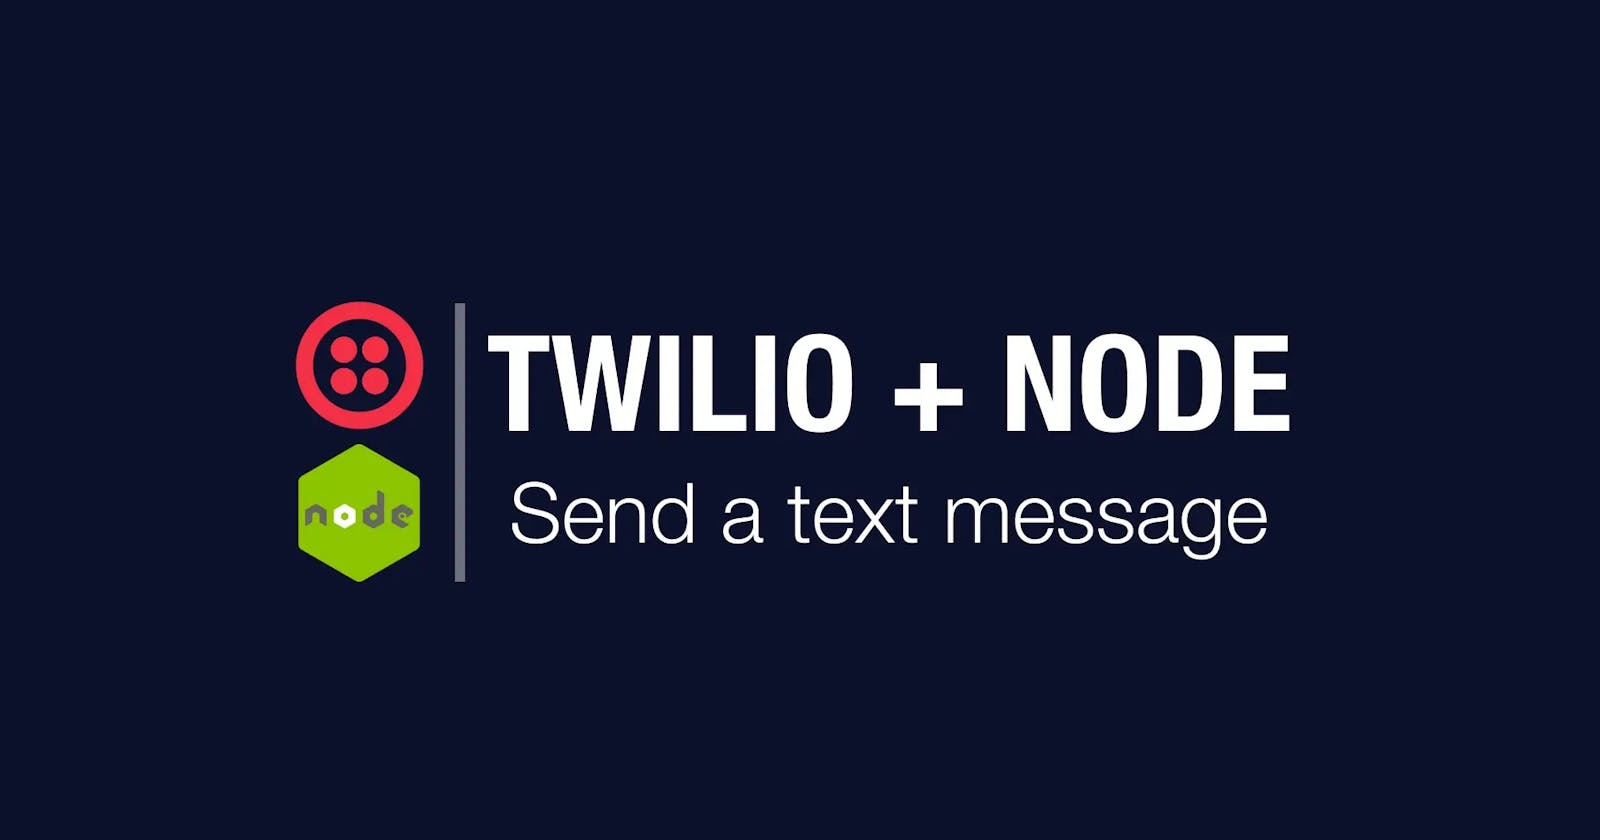 Twilio and Node - Send Your First Text Message